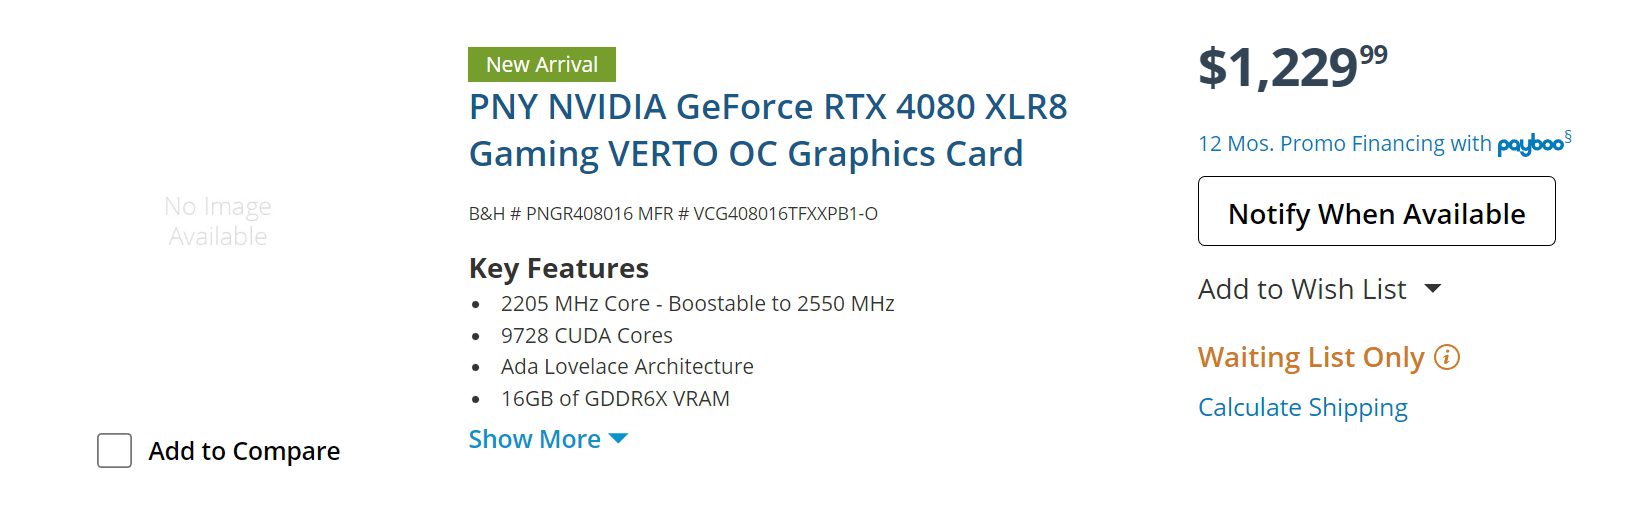 Screenshot of the B&H website with the Notify When Available button showing where to buy the RTX 4080